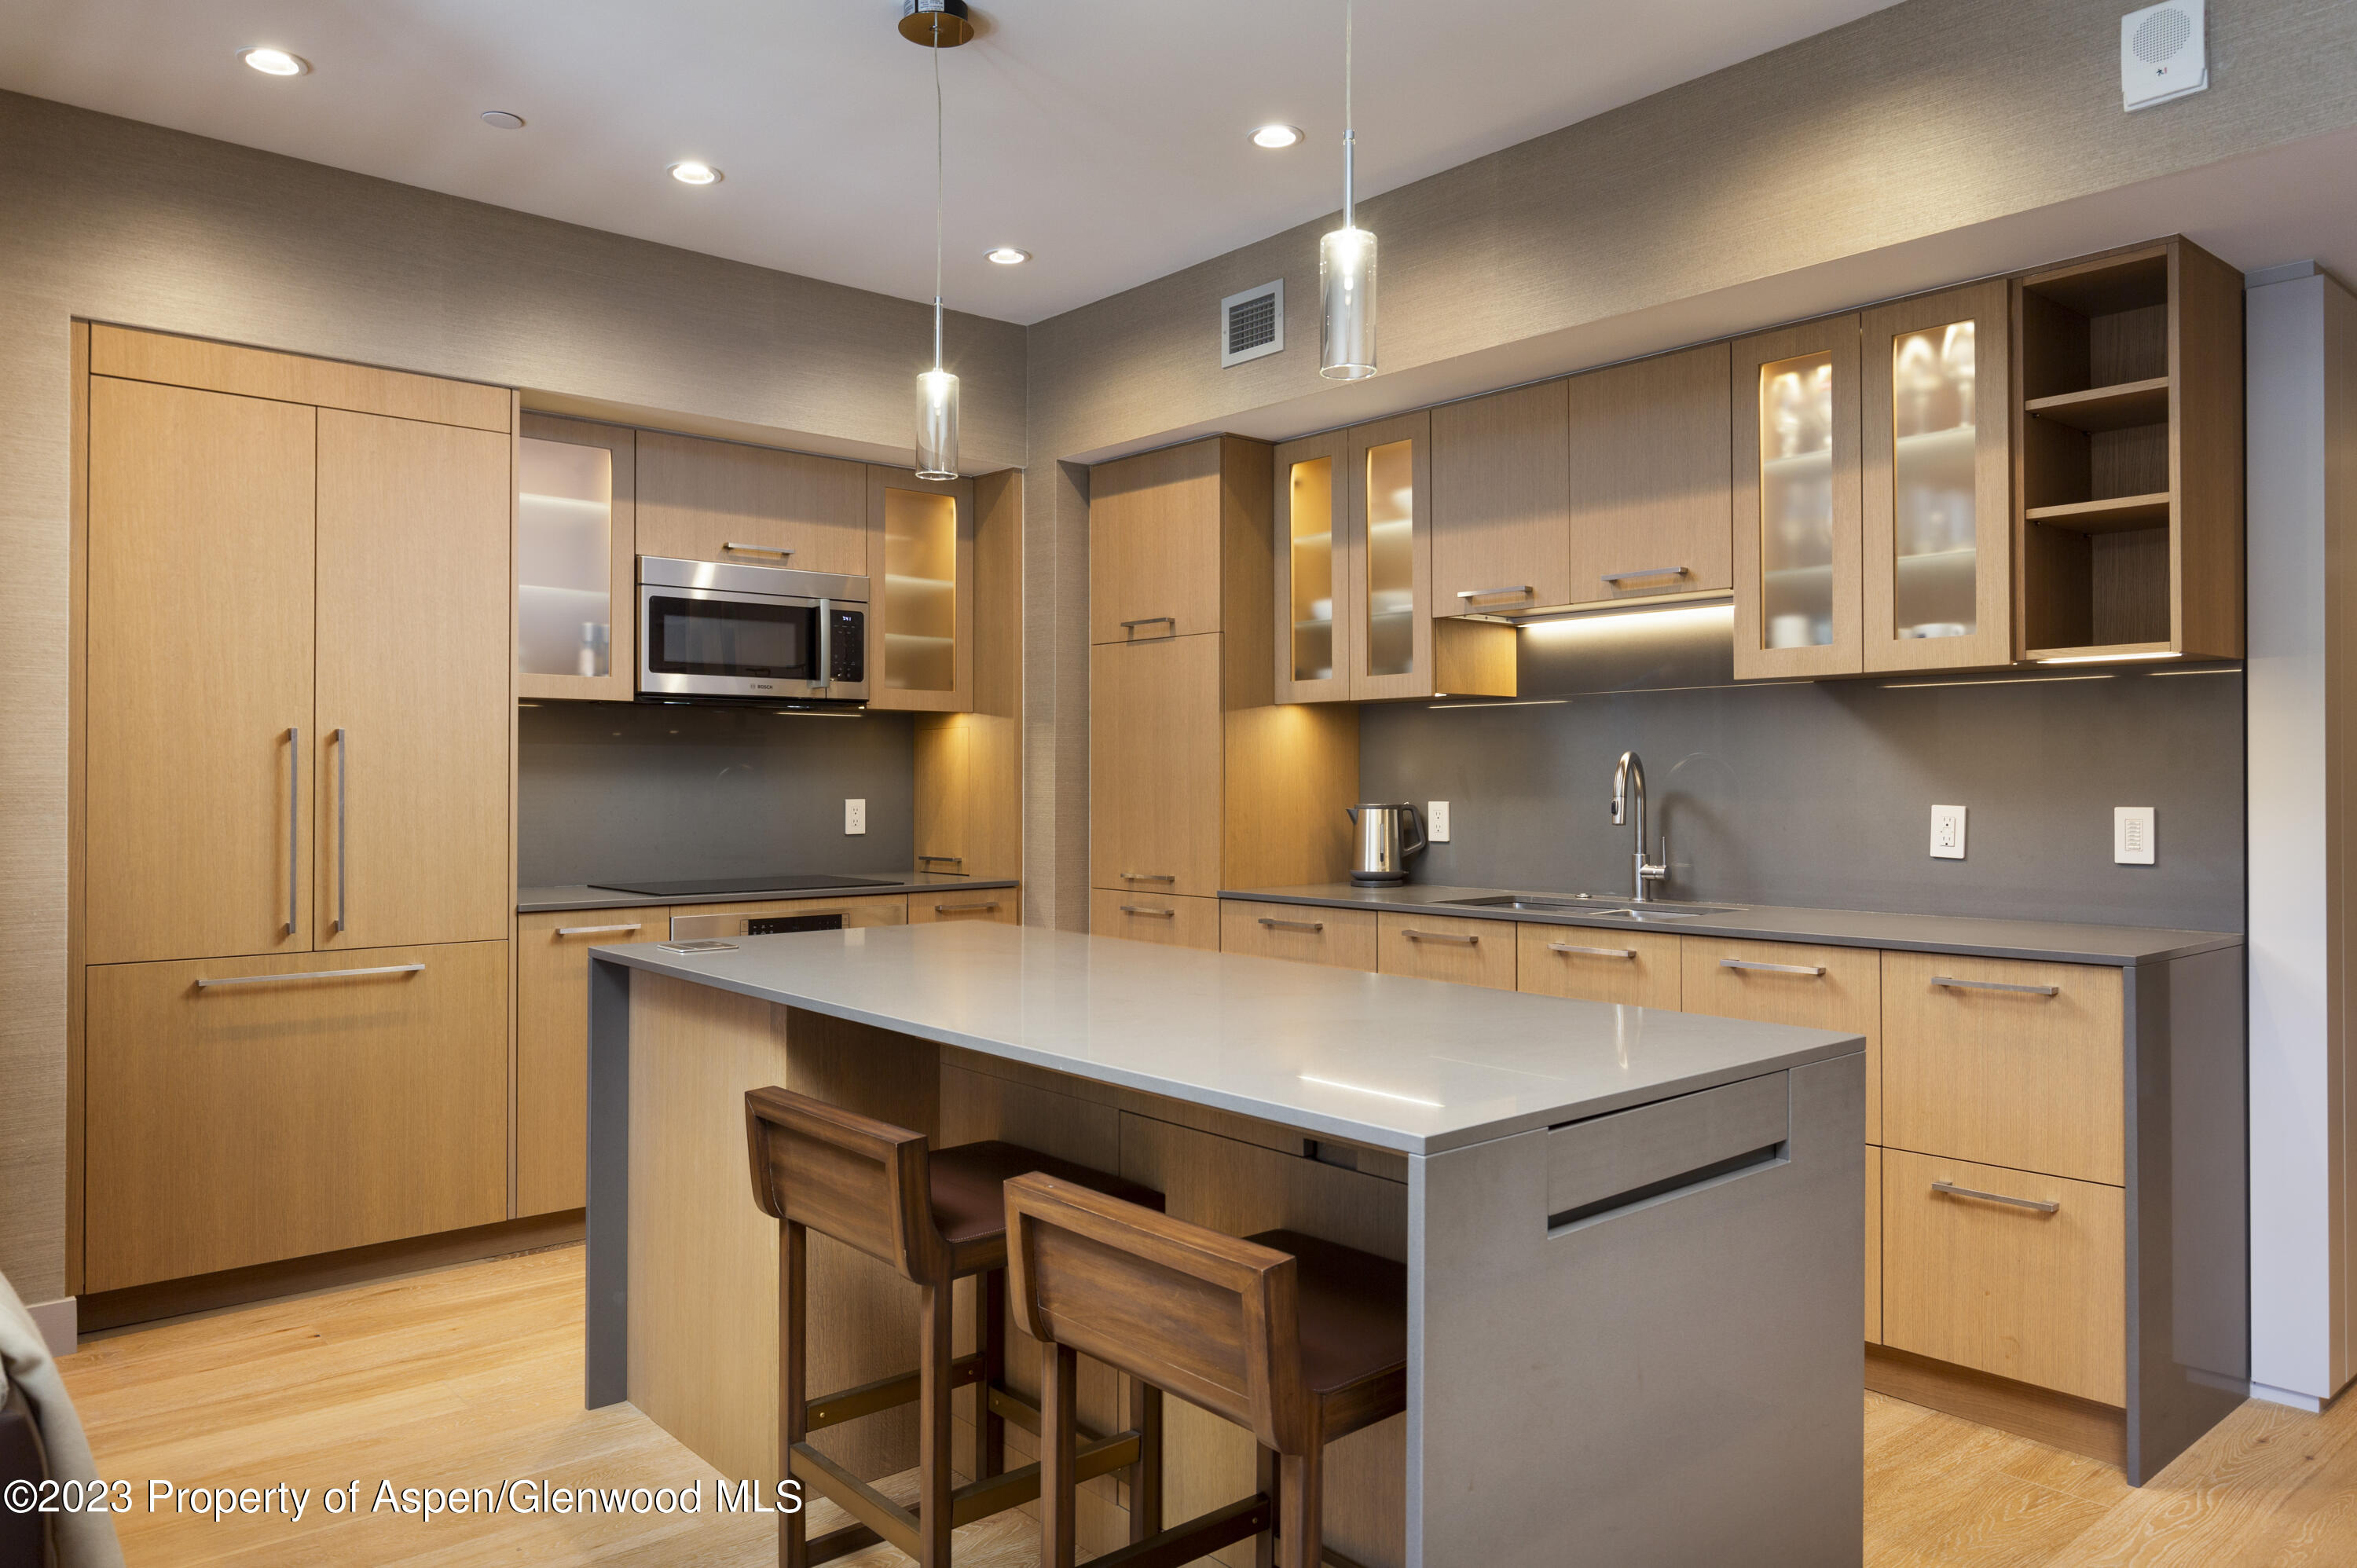 a kitchen with kitchen island a counter space a sink a refrigerator and a stove